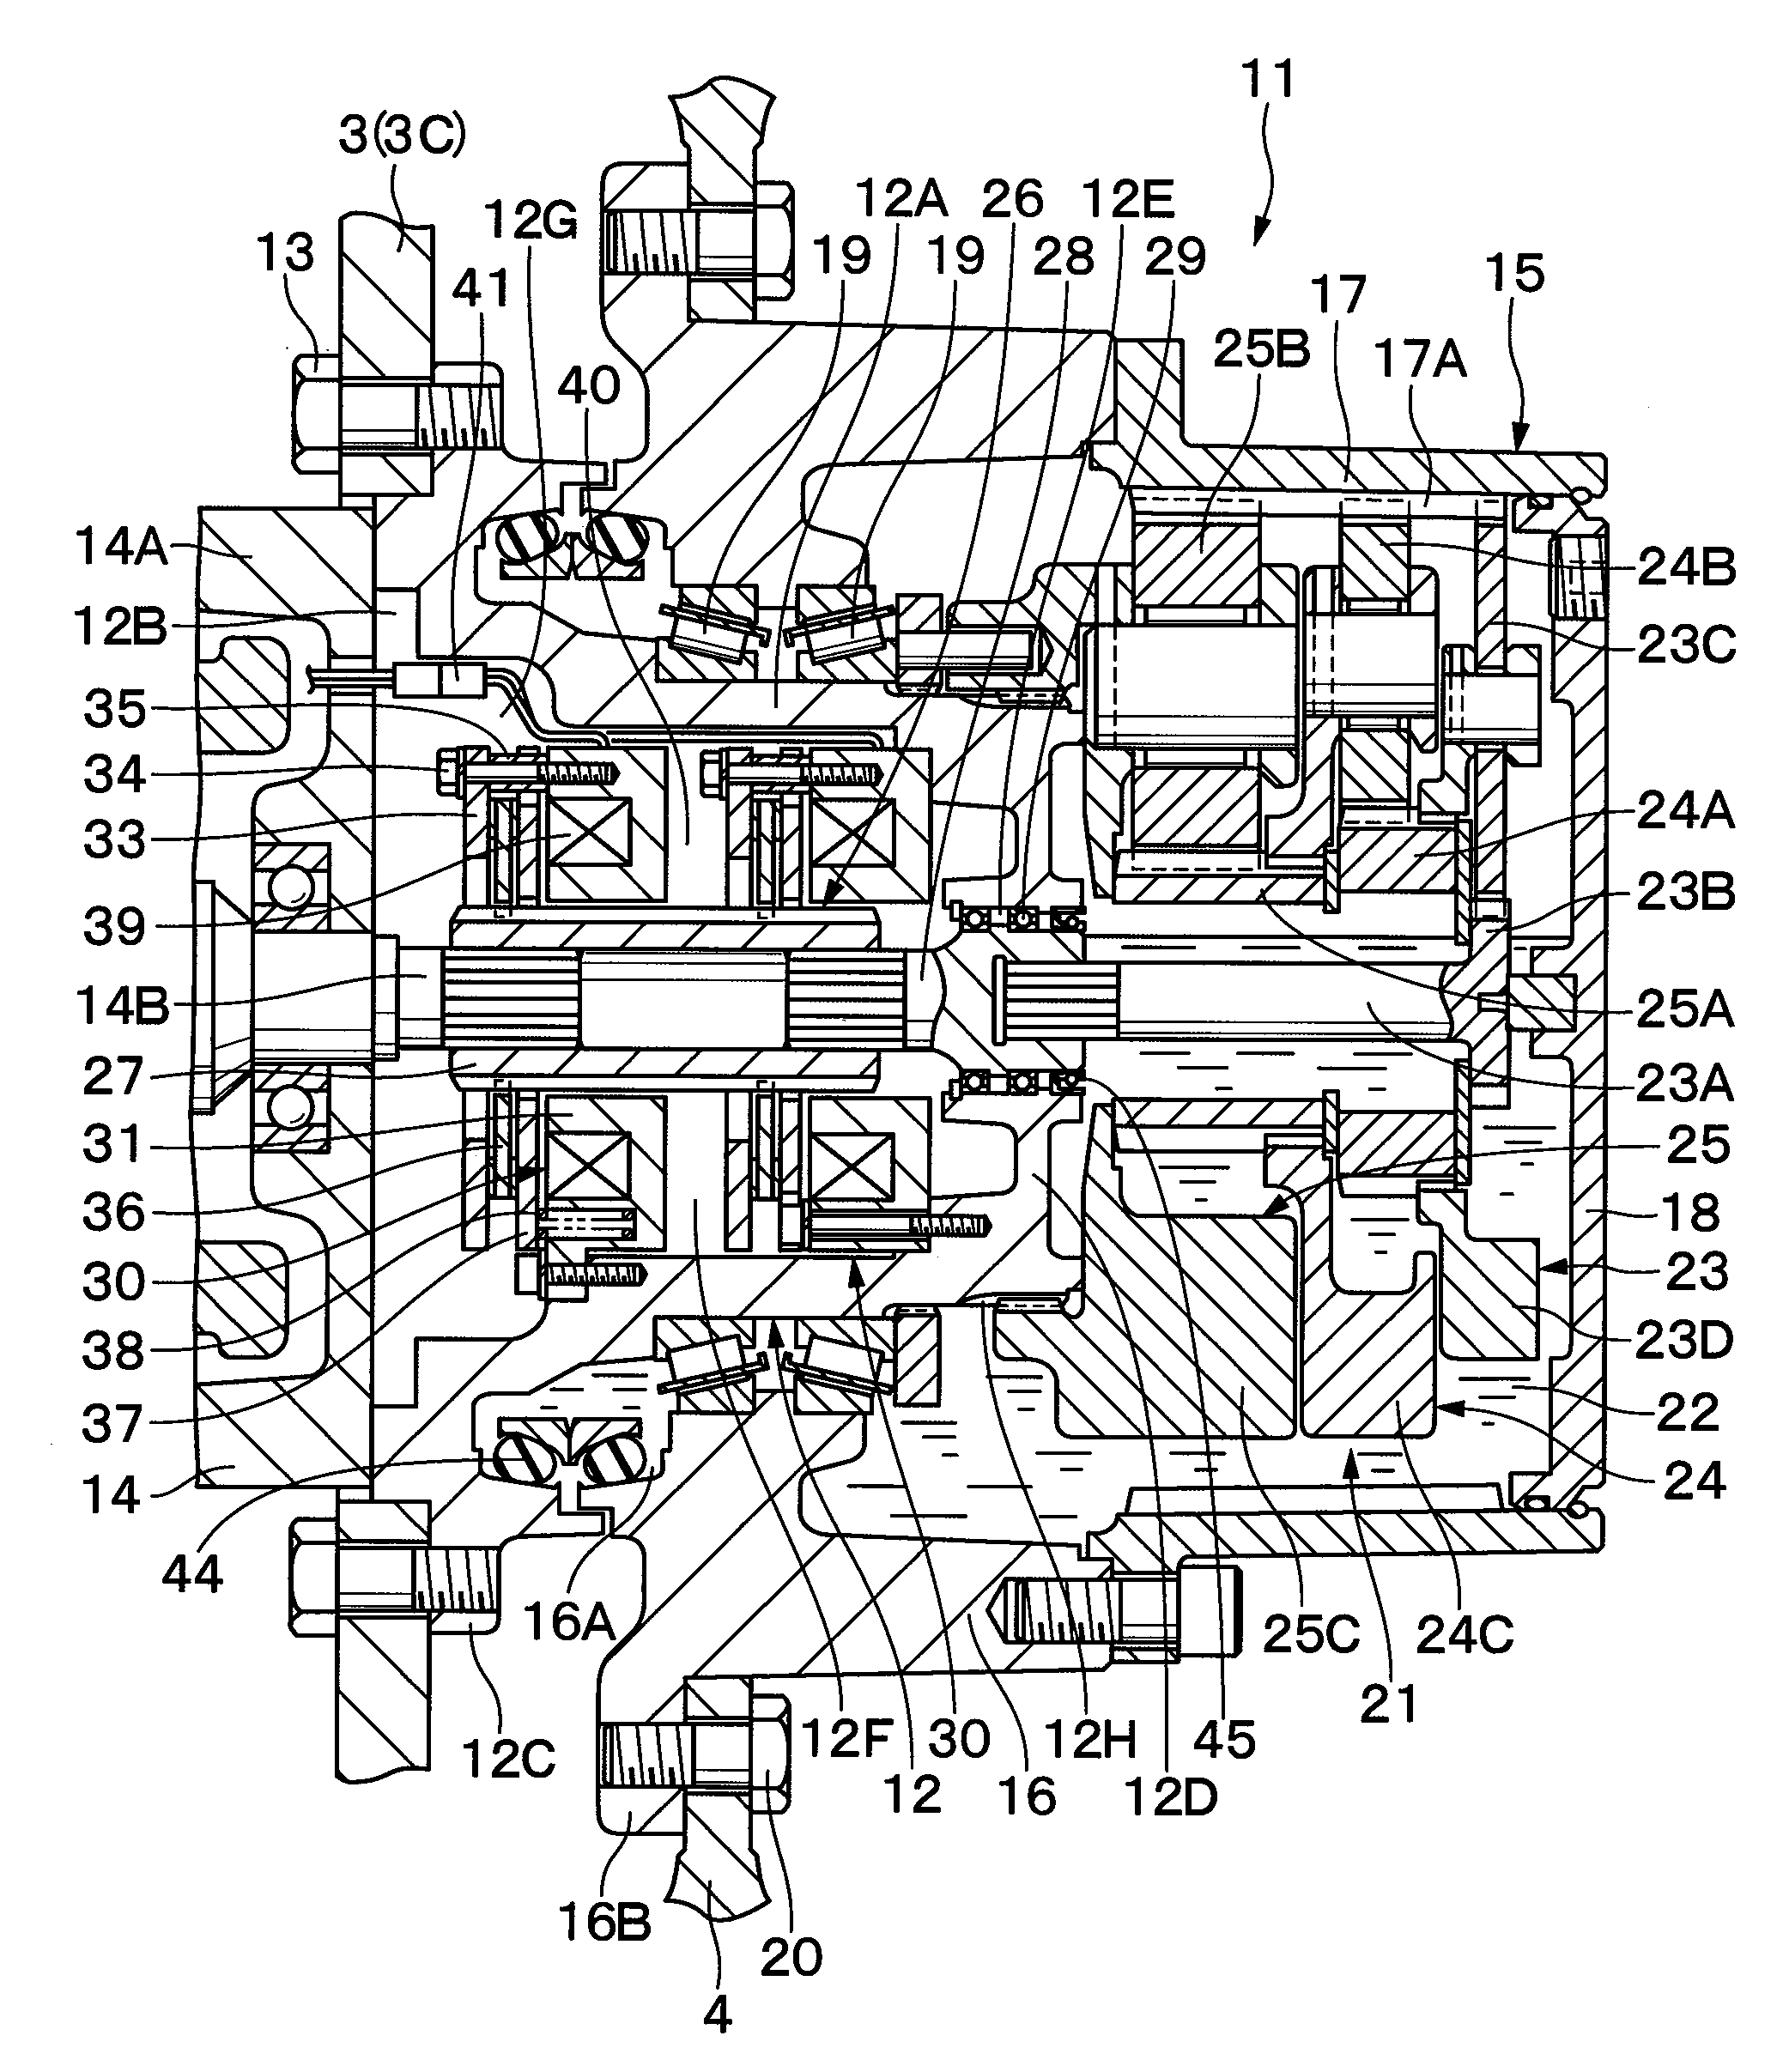 Drum rotating apparatus for use on construction machines